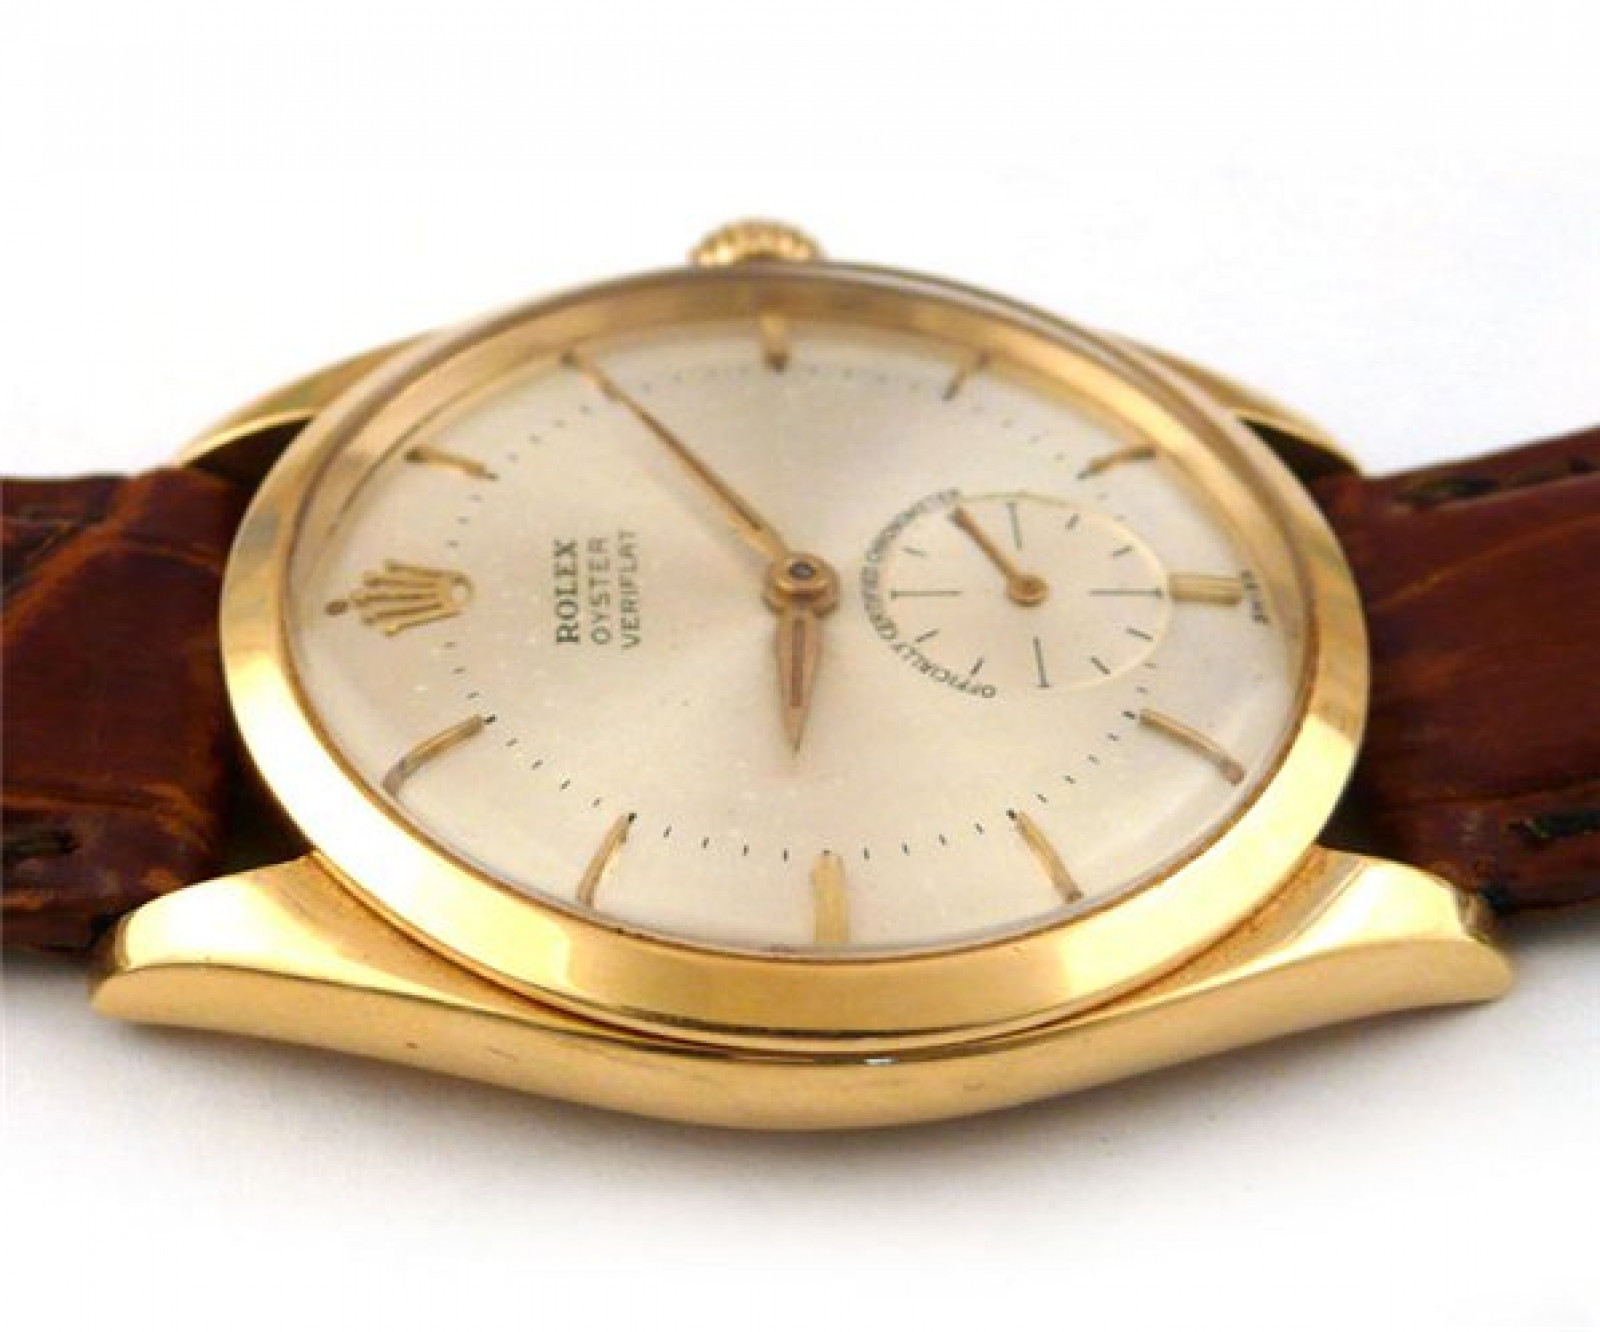 Vintage Rolex Veriflat 6512 Gold with Silver Dial